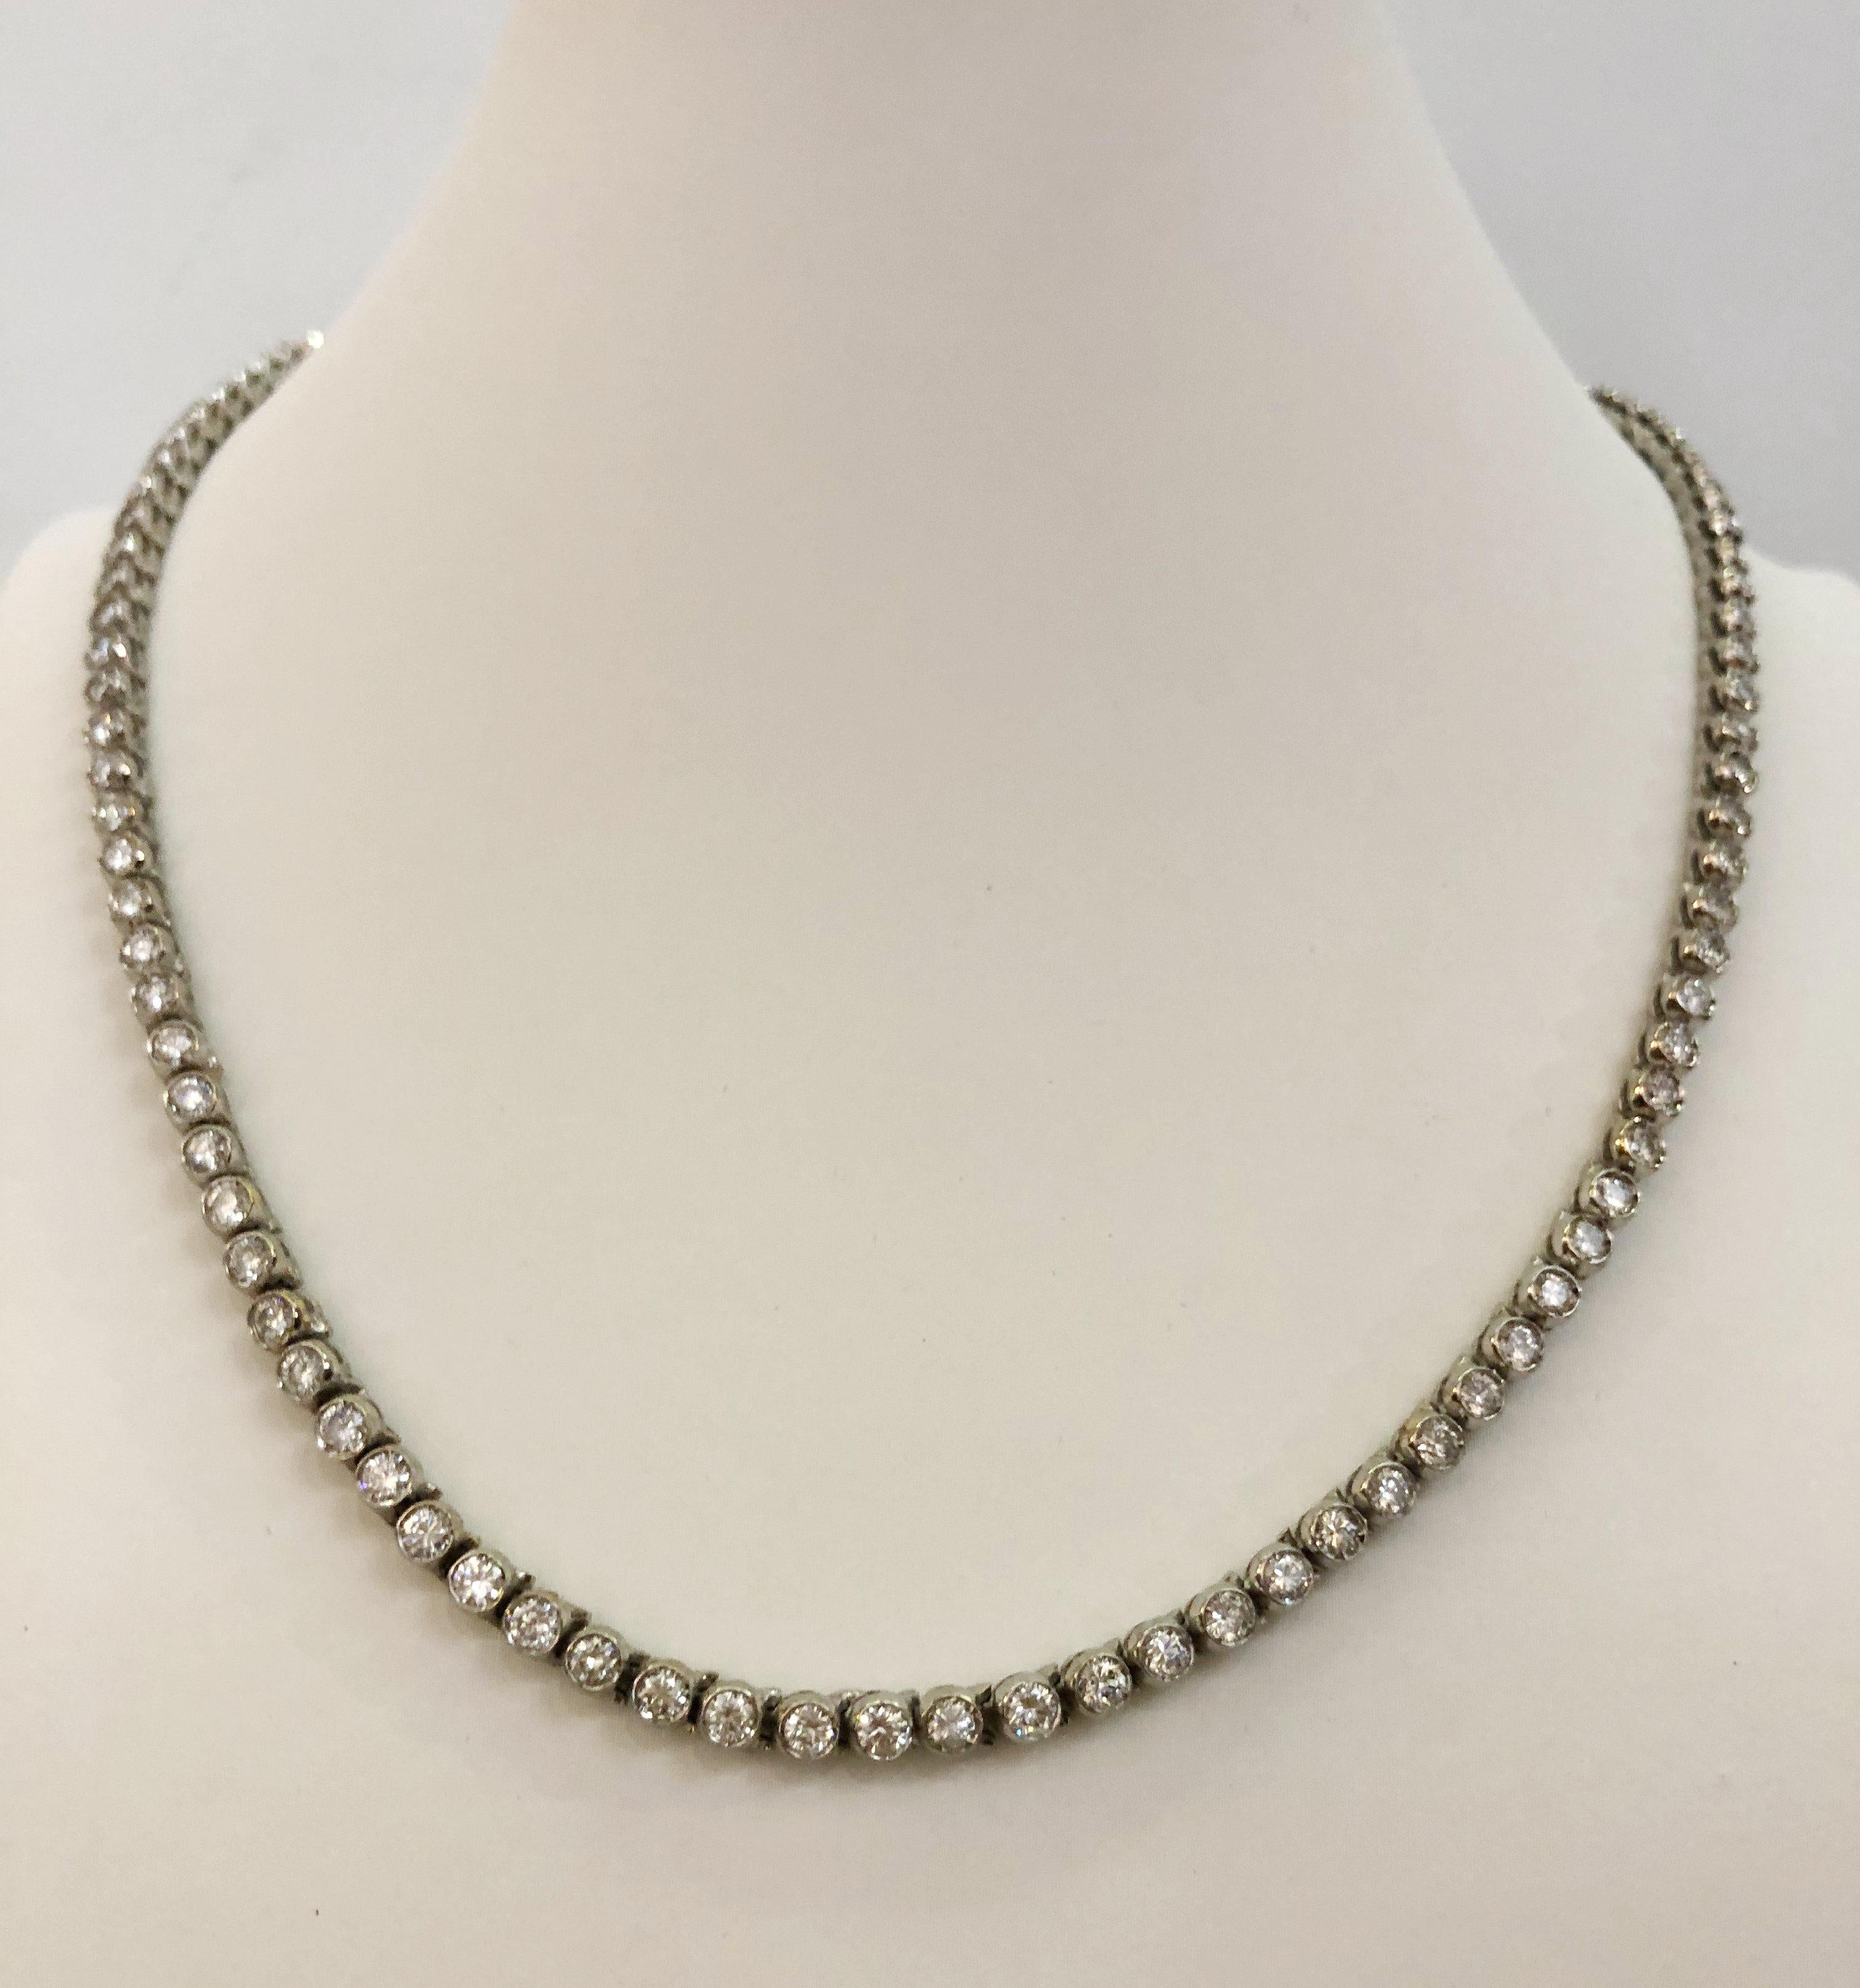 Vintage 18 karat white gold Tennis style necklace with brilliant diamonds for a total 6.5 karats /  Italy 1980-1990
Length 42 cm